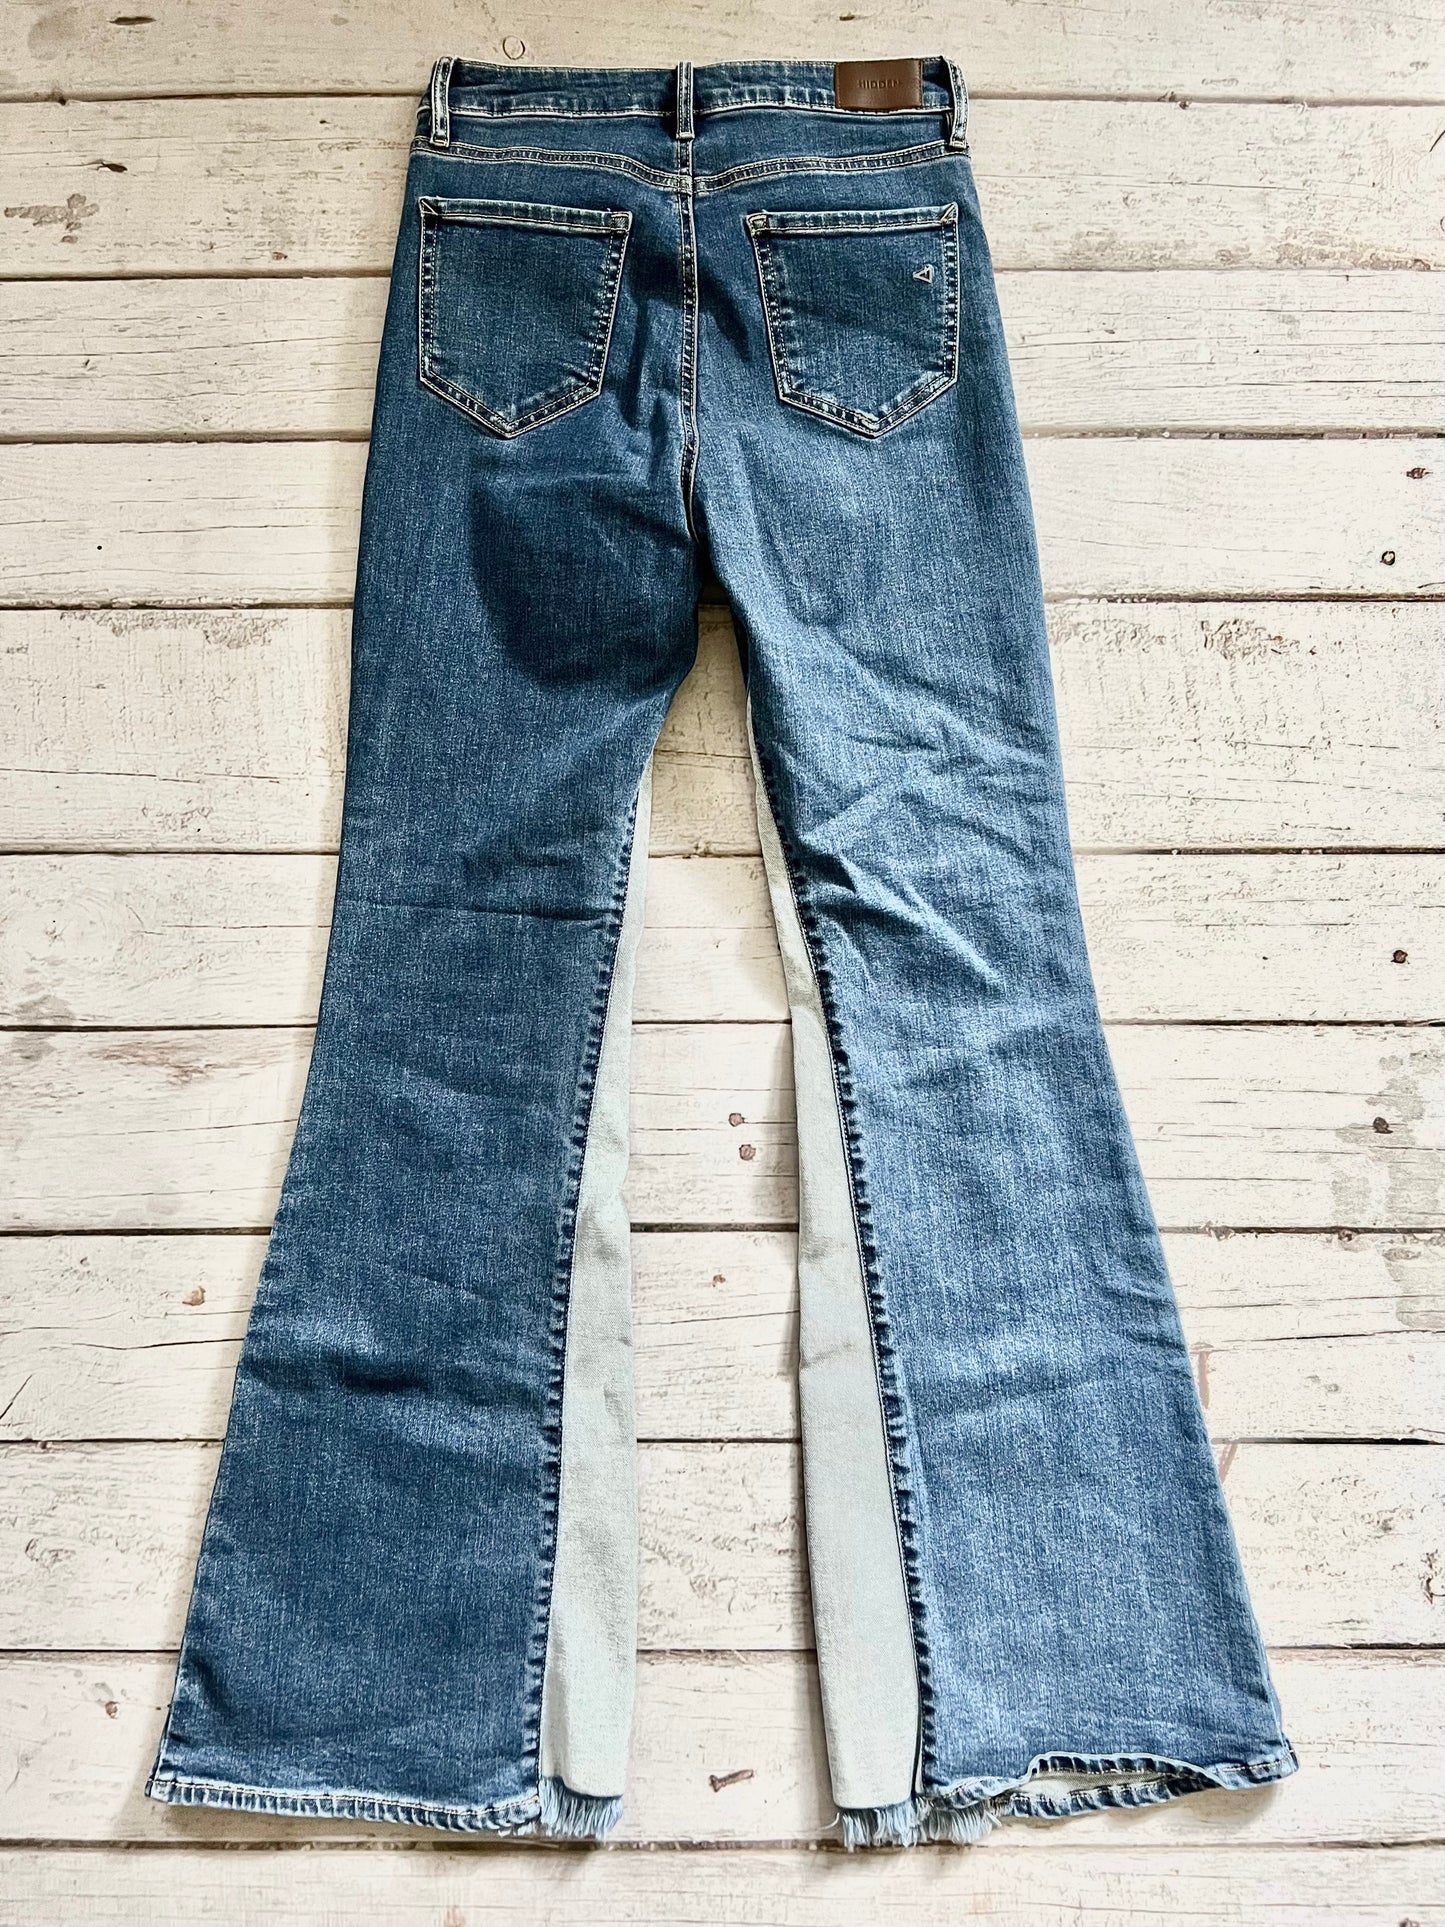 Jeans Flared By Hidden Size: 6